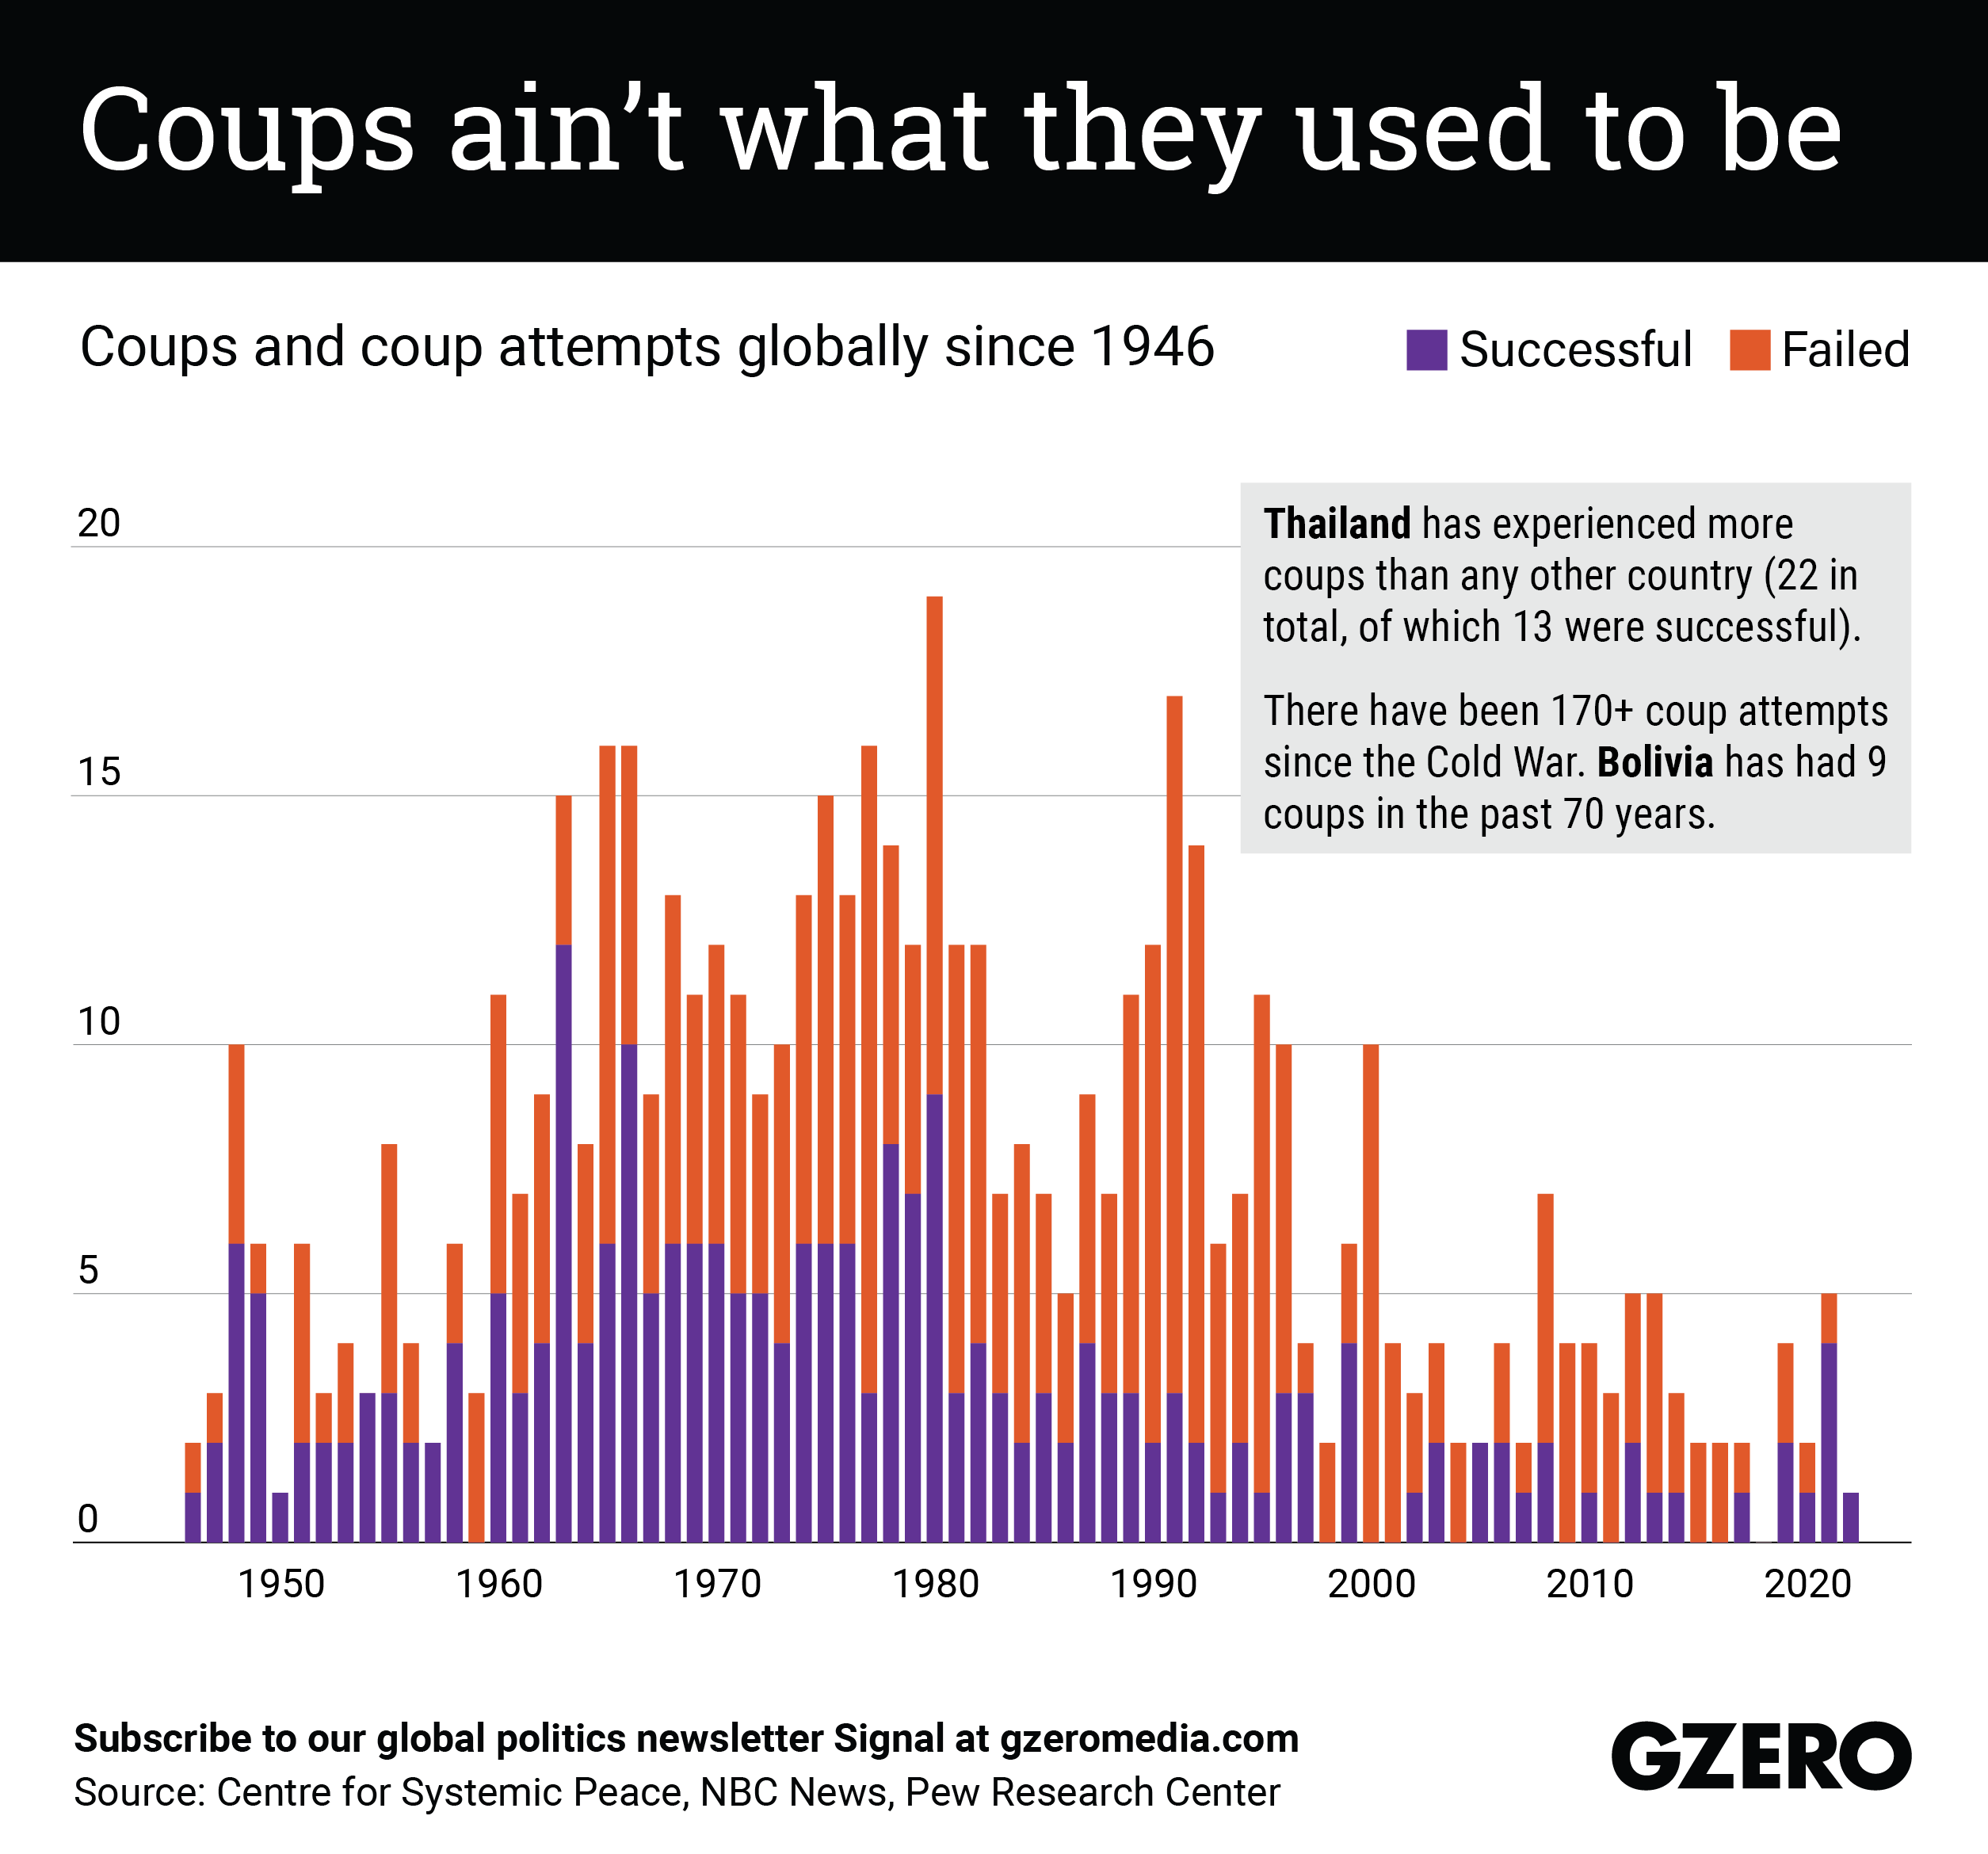 The Graphic Truth: Coups ain’t what they used to be